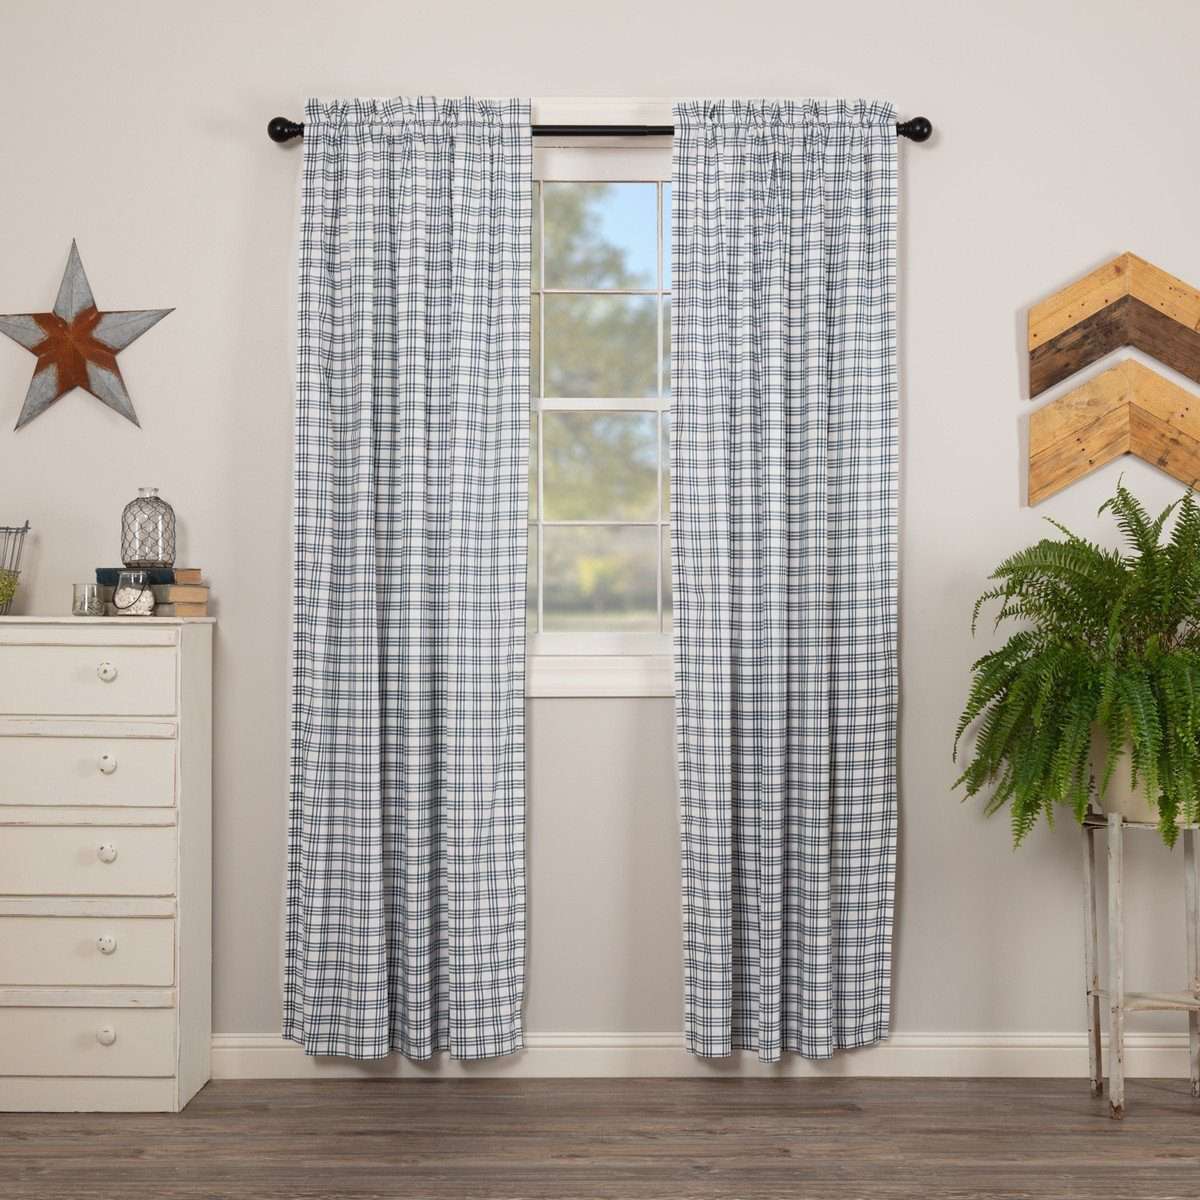 Sawyer Mill Charcoal/Blue/Red Plaid Panel Curtain Set of 2 84x40 - The Fox Decor